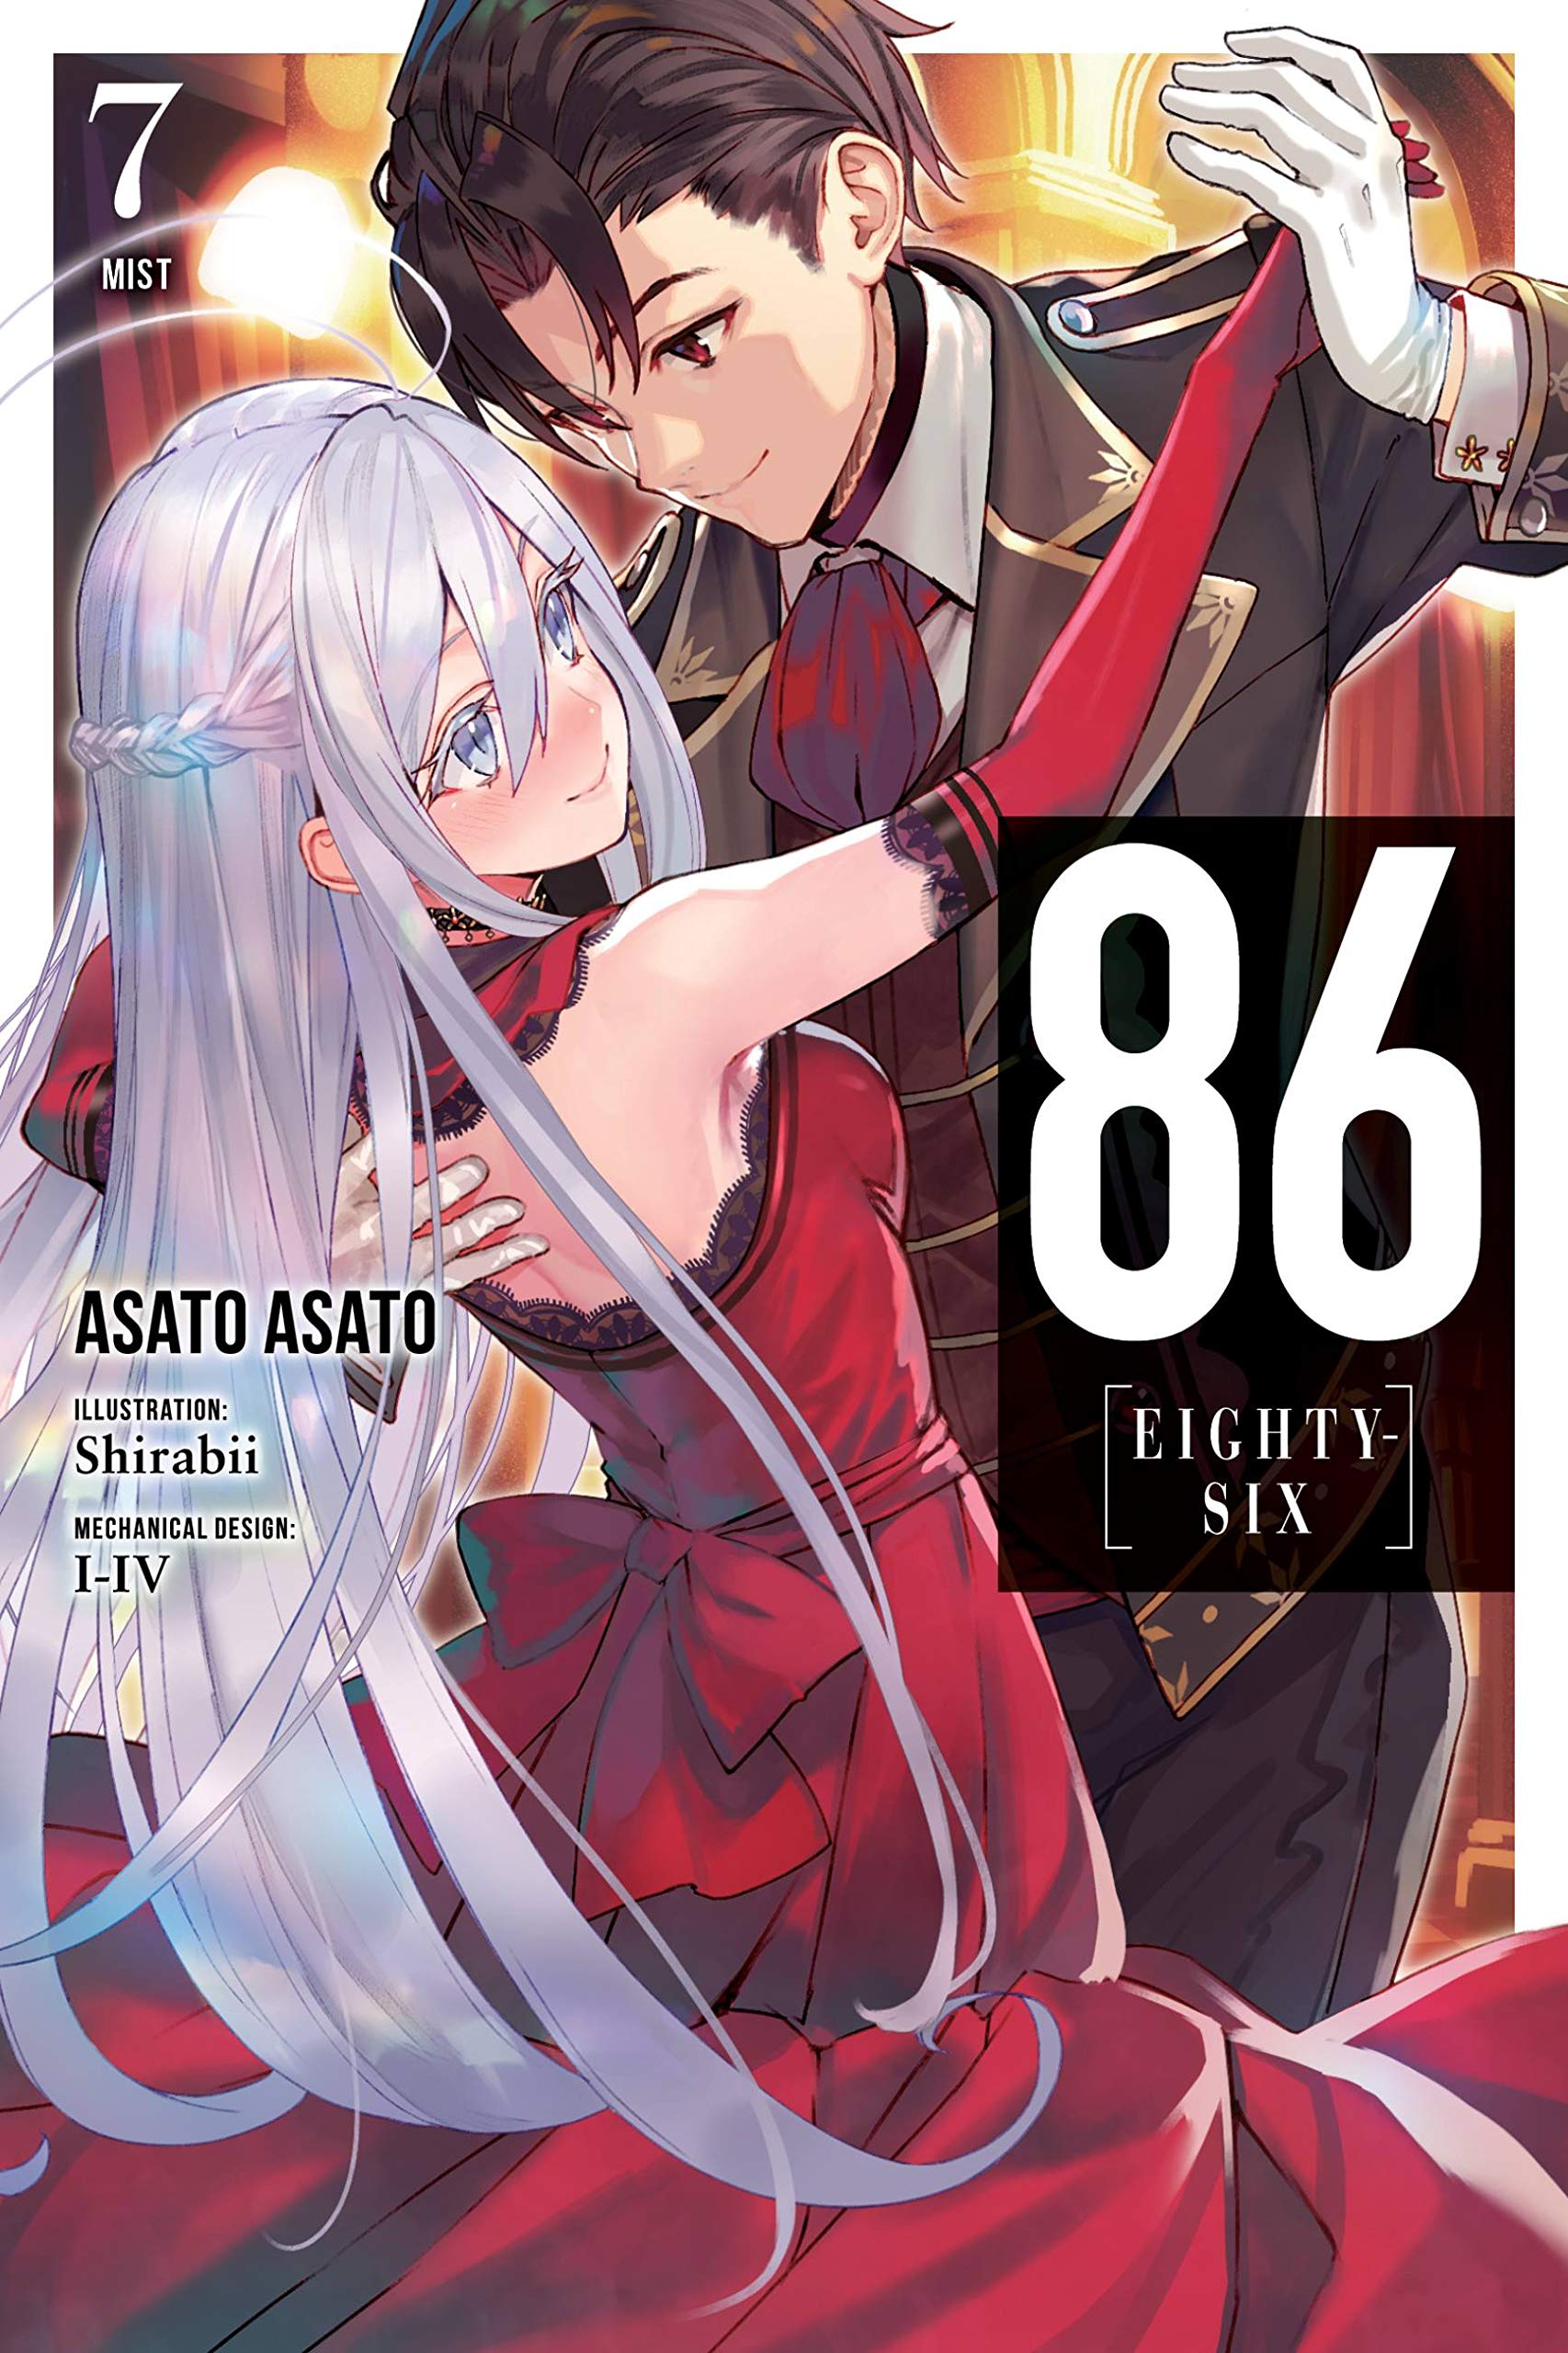 Eighty-Six Cour 1 Anime Review